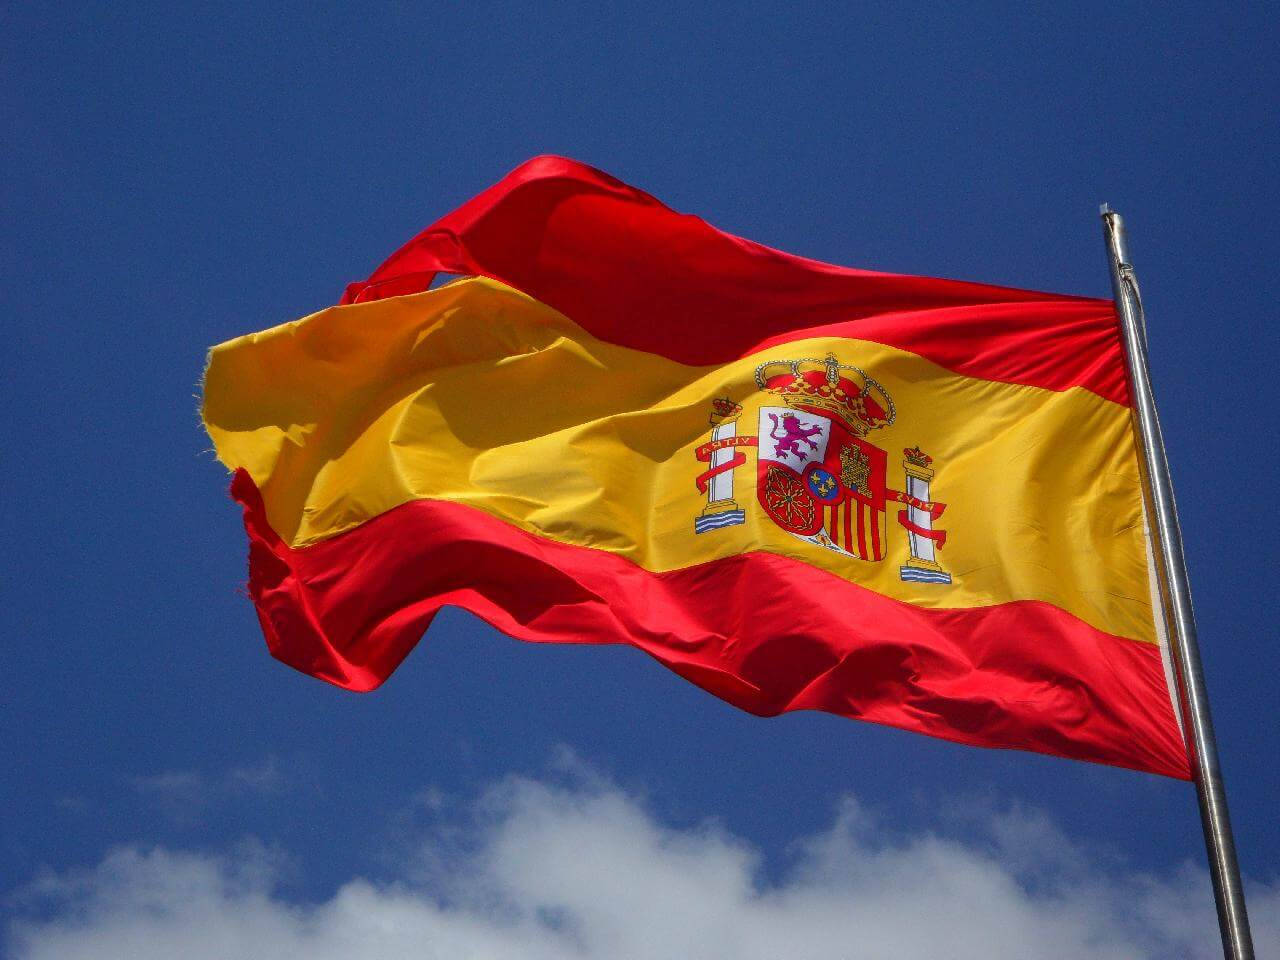 Caption: Spain's National Pride - Magnificent Spain Flag Soaring High Against The Clear Blue Sky Background